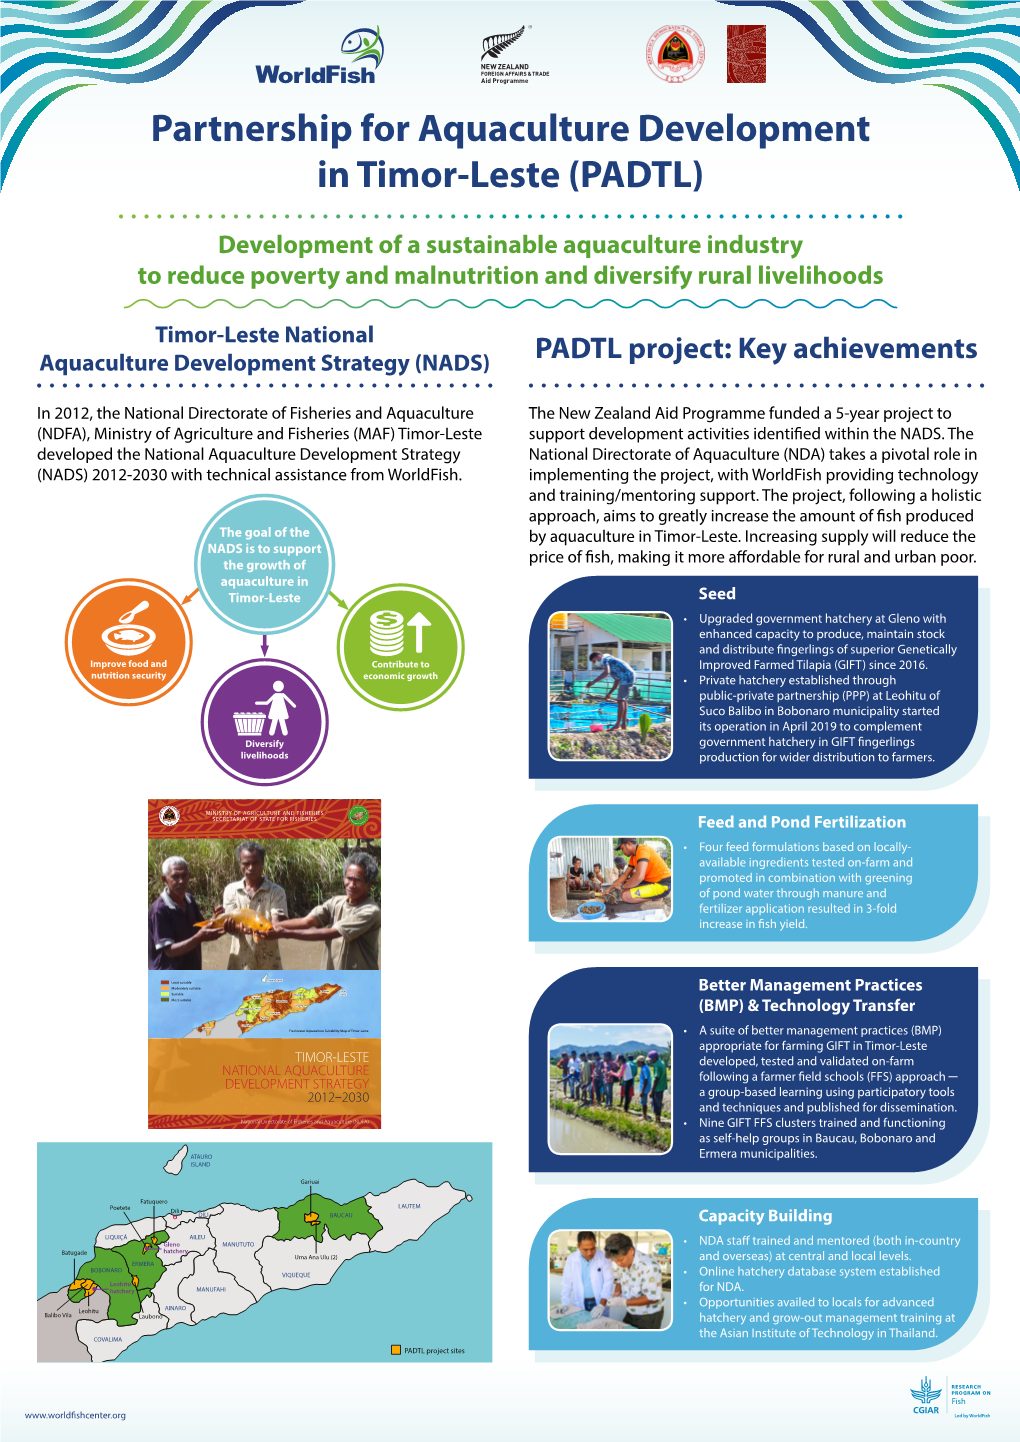 Development of a Sustainable Aquaculture Industry to Reduce Poverty and Malnutrition and Diversify Rural Livelihoods